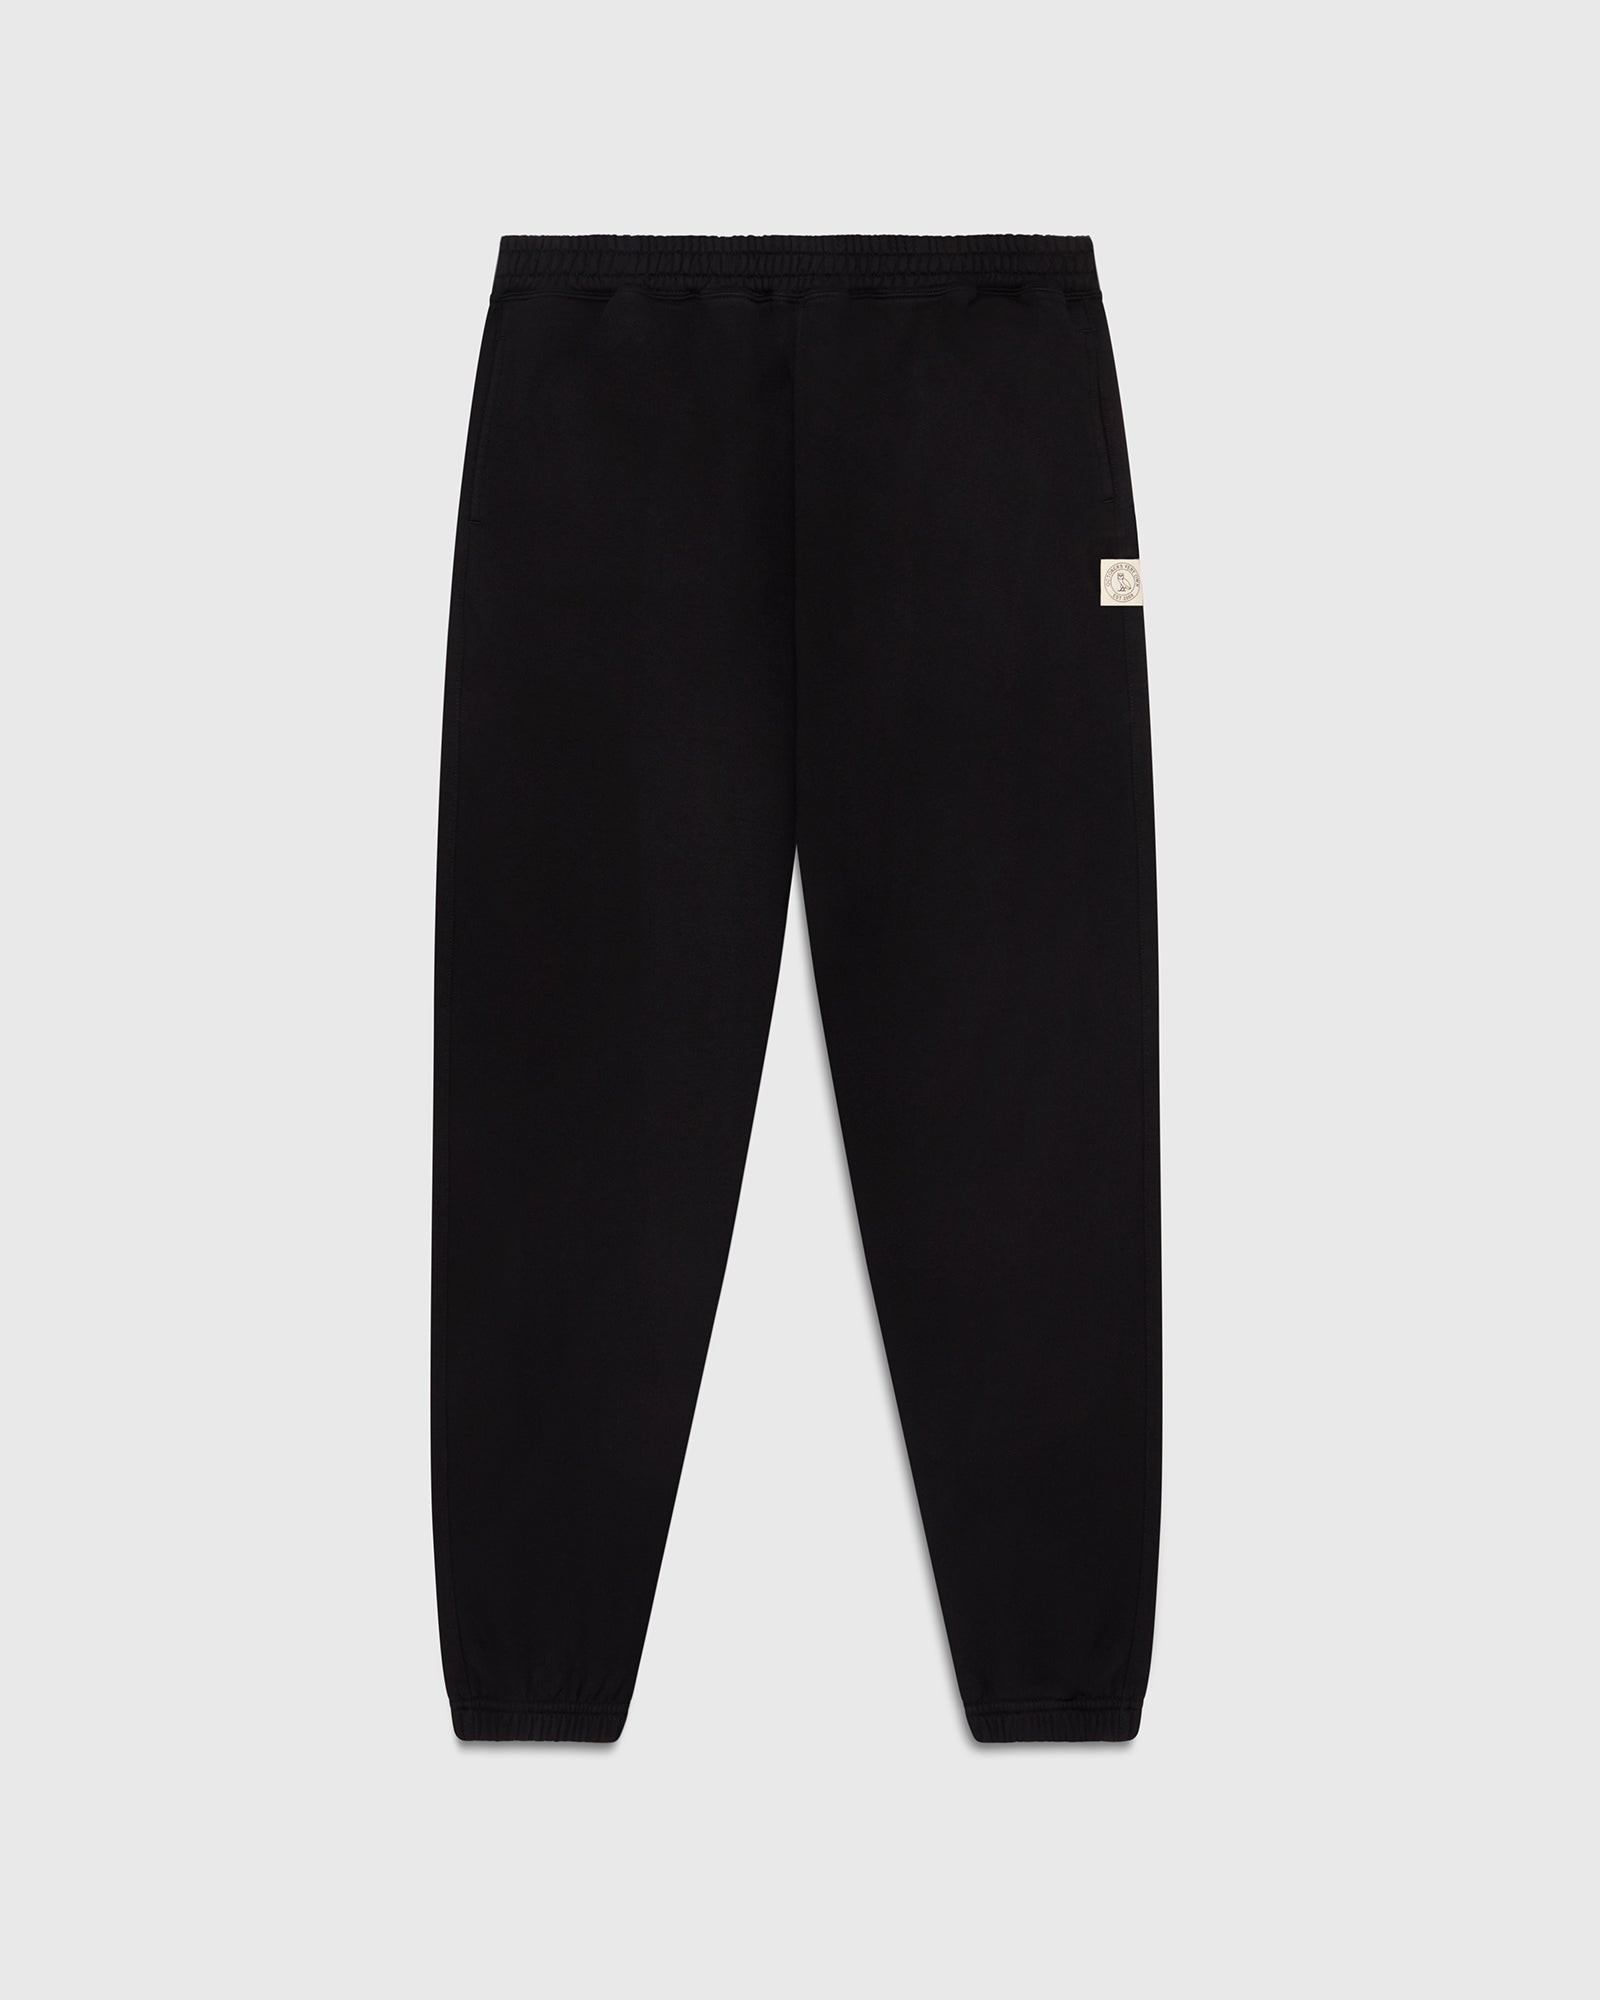 French Terry Relaxed Fit Sweatpant - Black